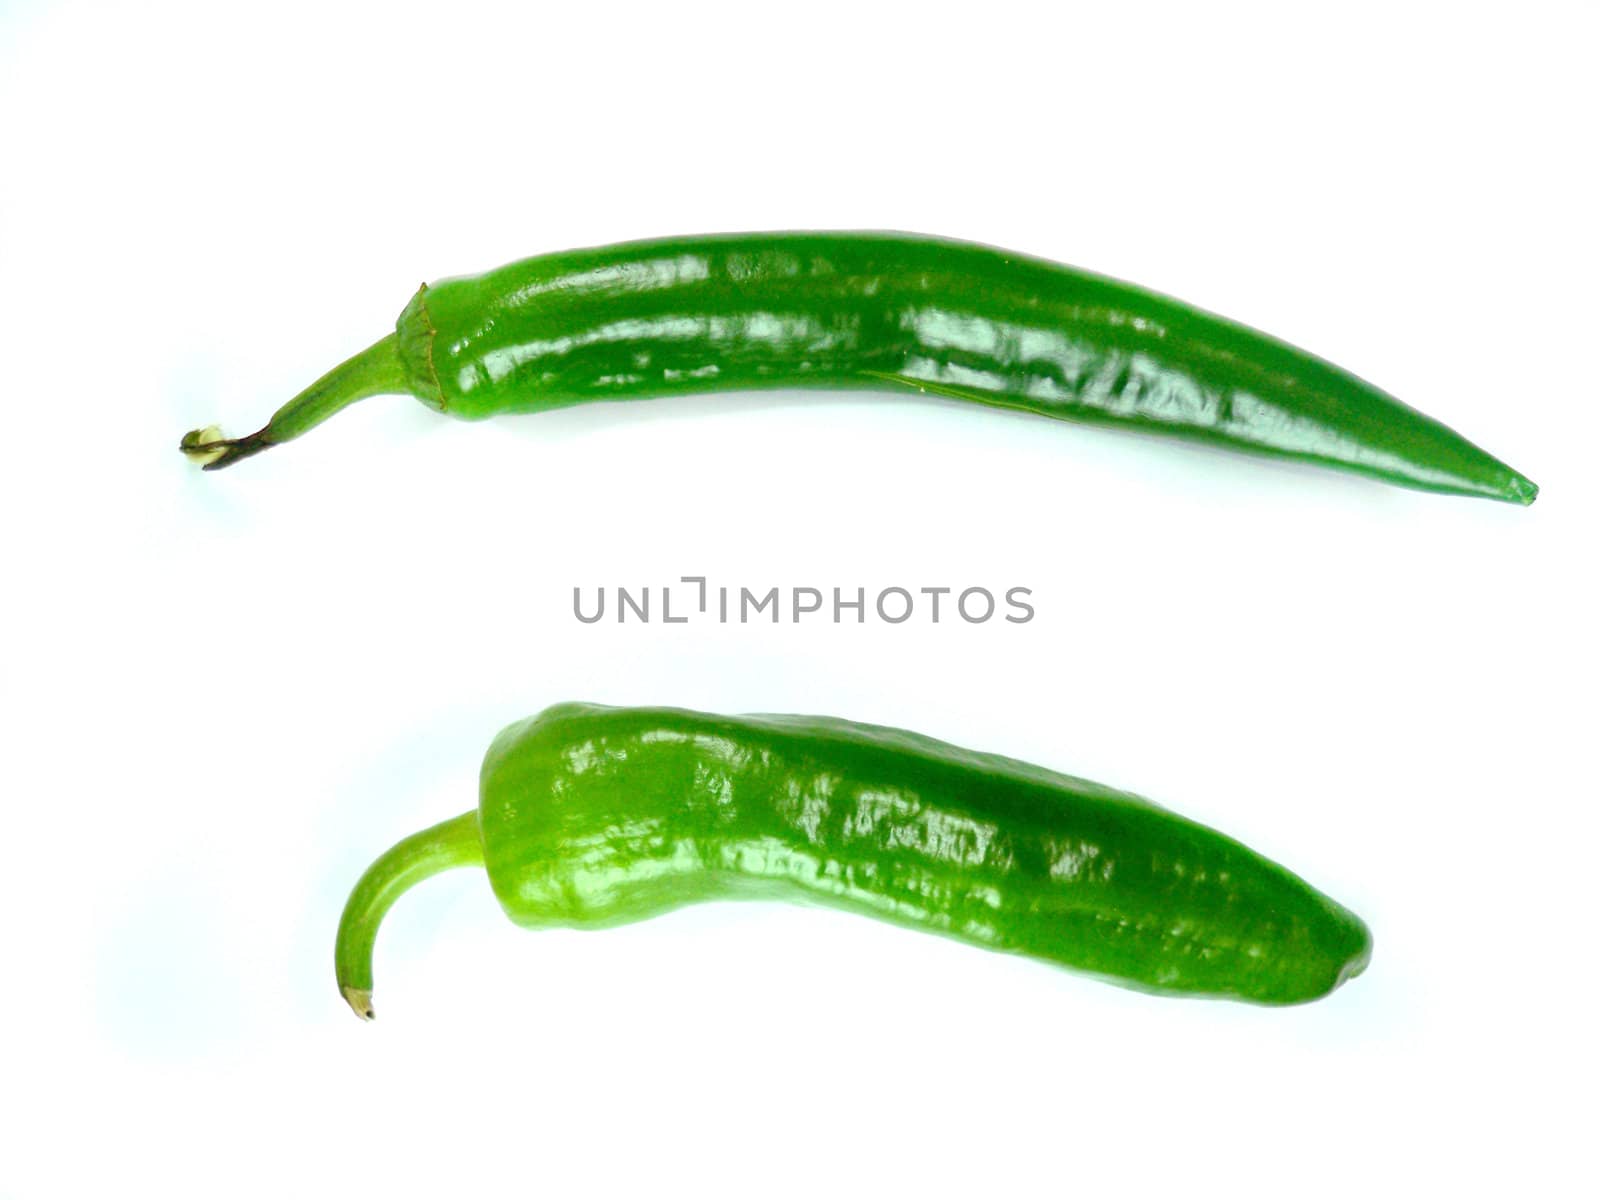 chili pepper, green isolated on white background